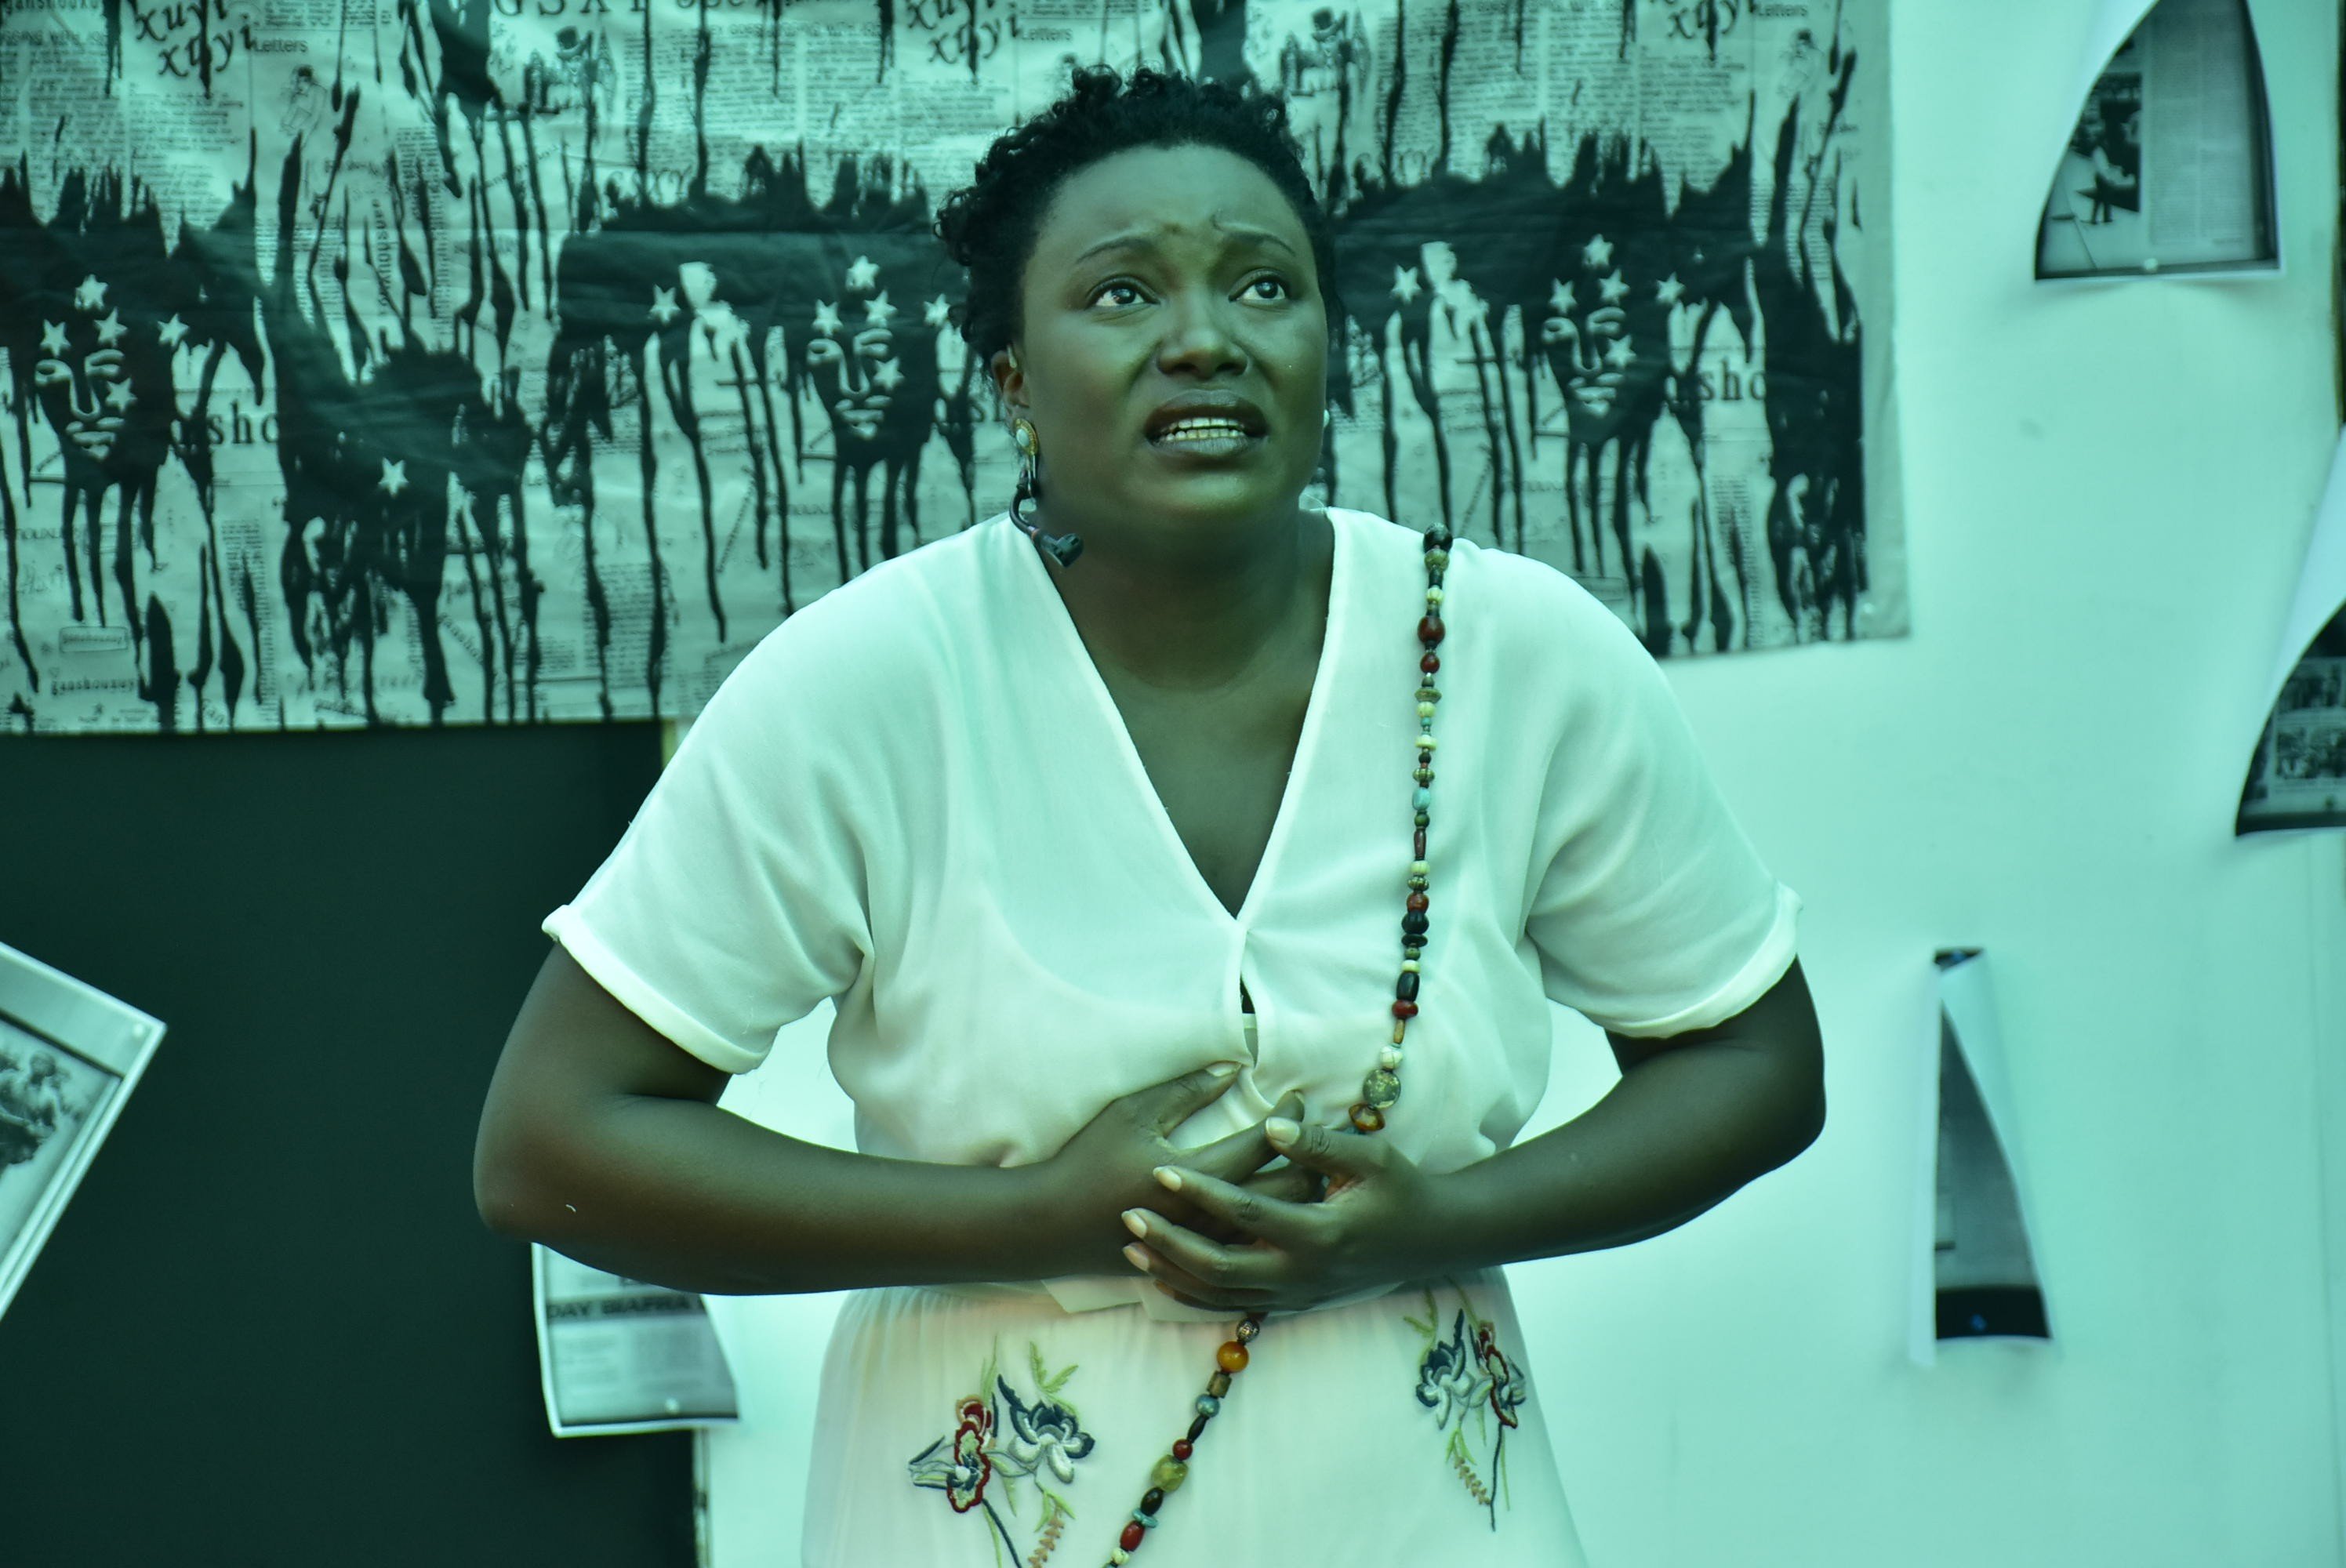 Playwright, director and performer Donna Ogunnaike in Strelitzia, which physically immerses the audience in a multisensory diary of self-discovery through a journey into the public and private history of the Nigerian people.